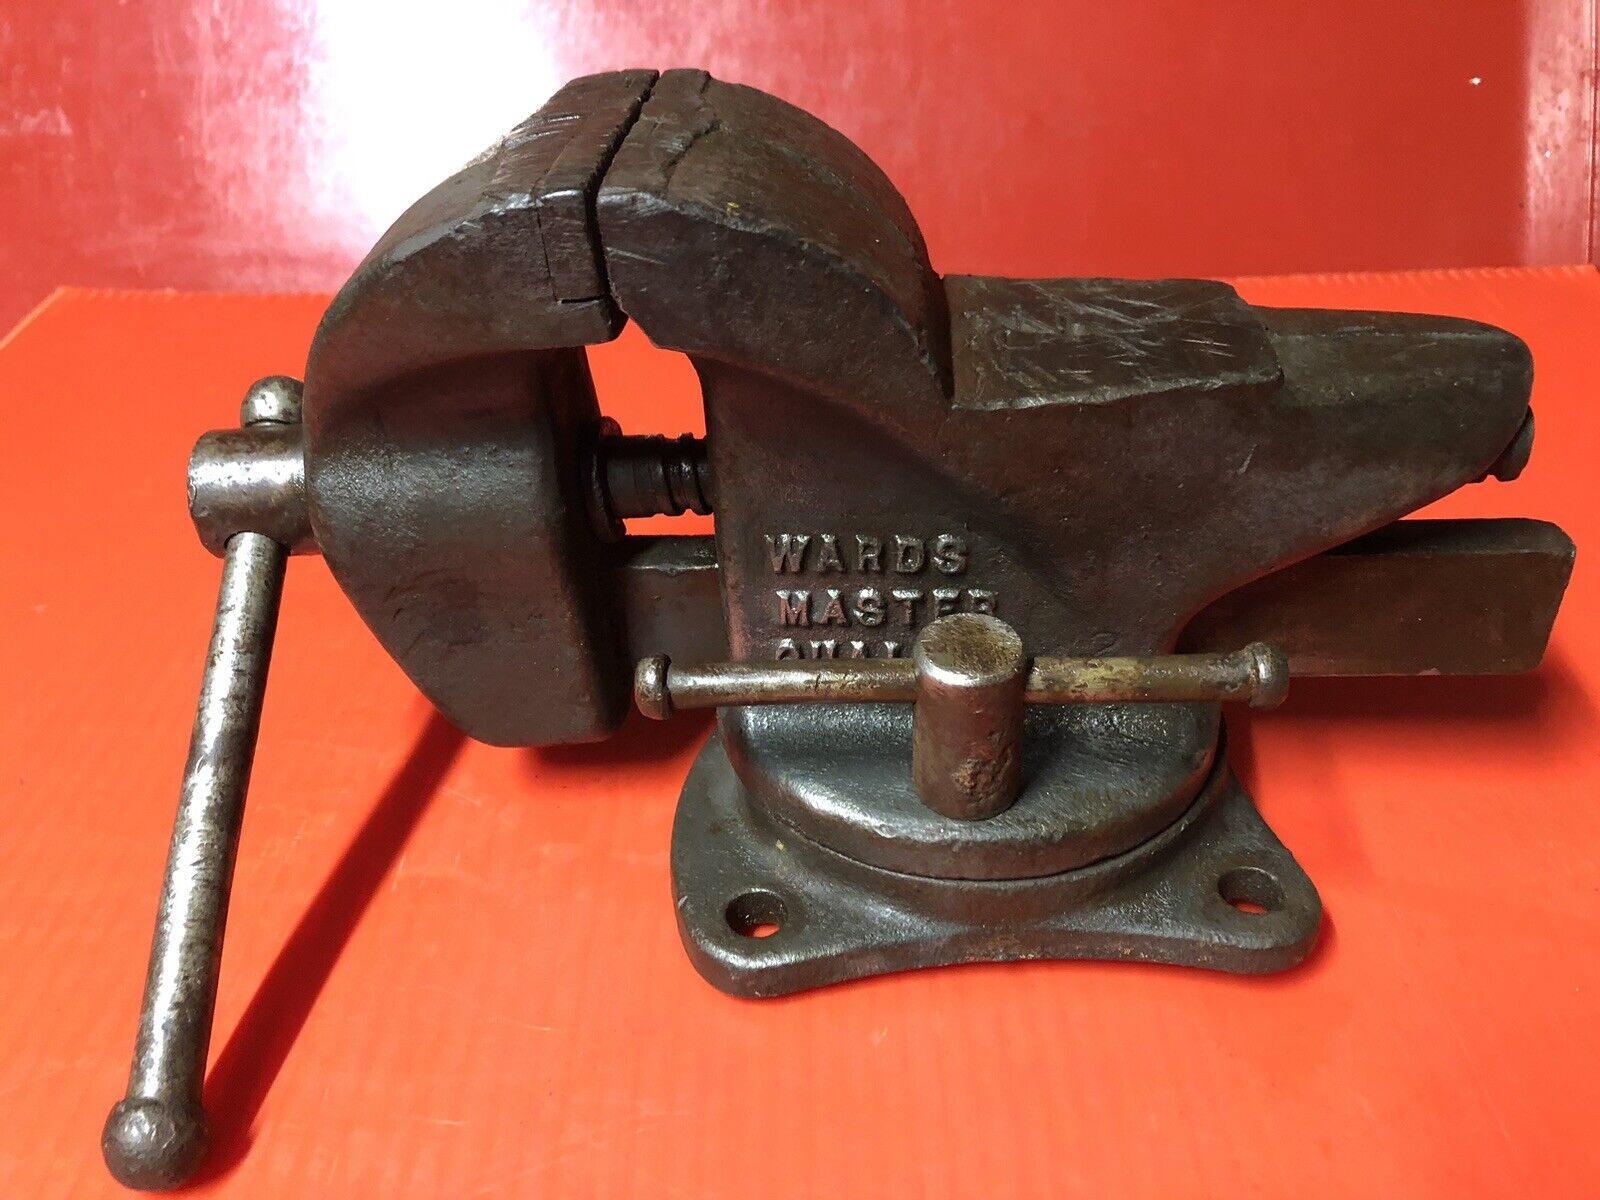 WARDS MASTER QUALITY Vintage 3” Bench Vise w/Swivel Base ~ For Parts Or Repair